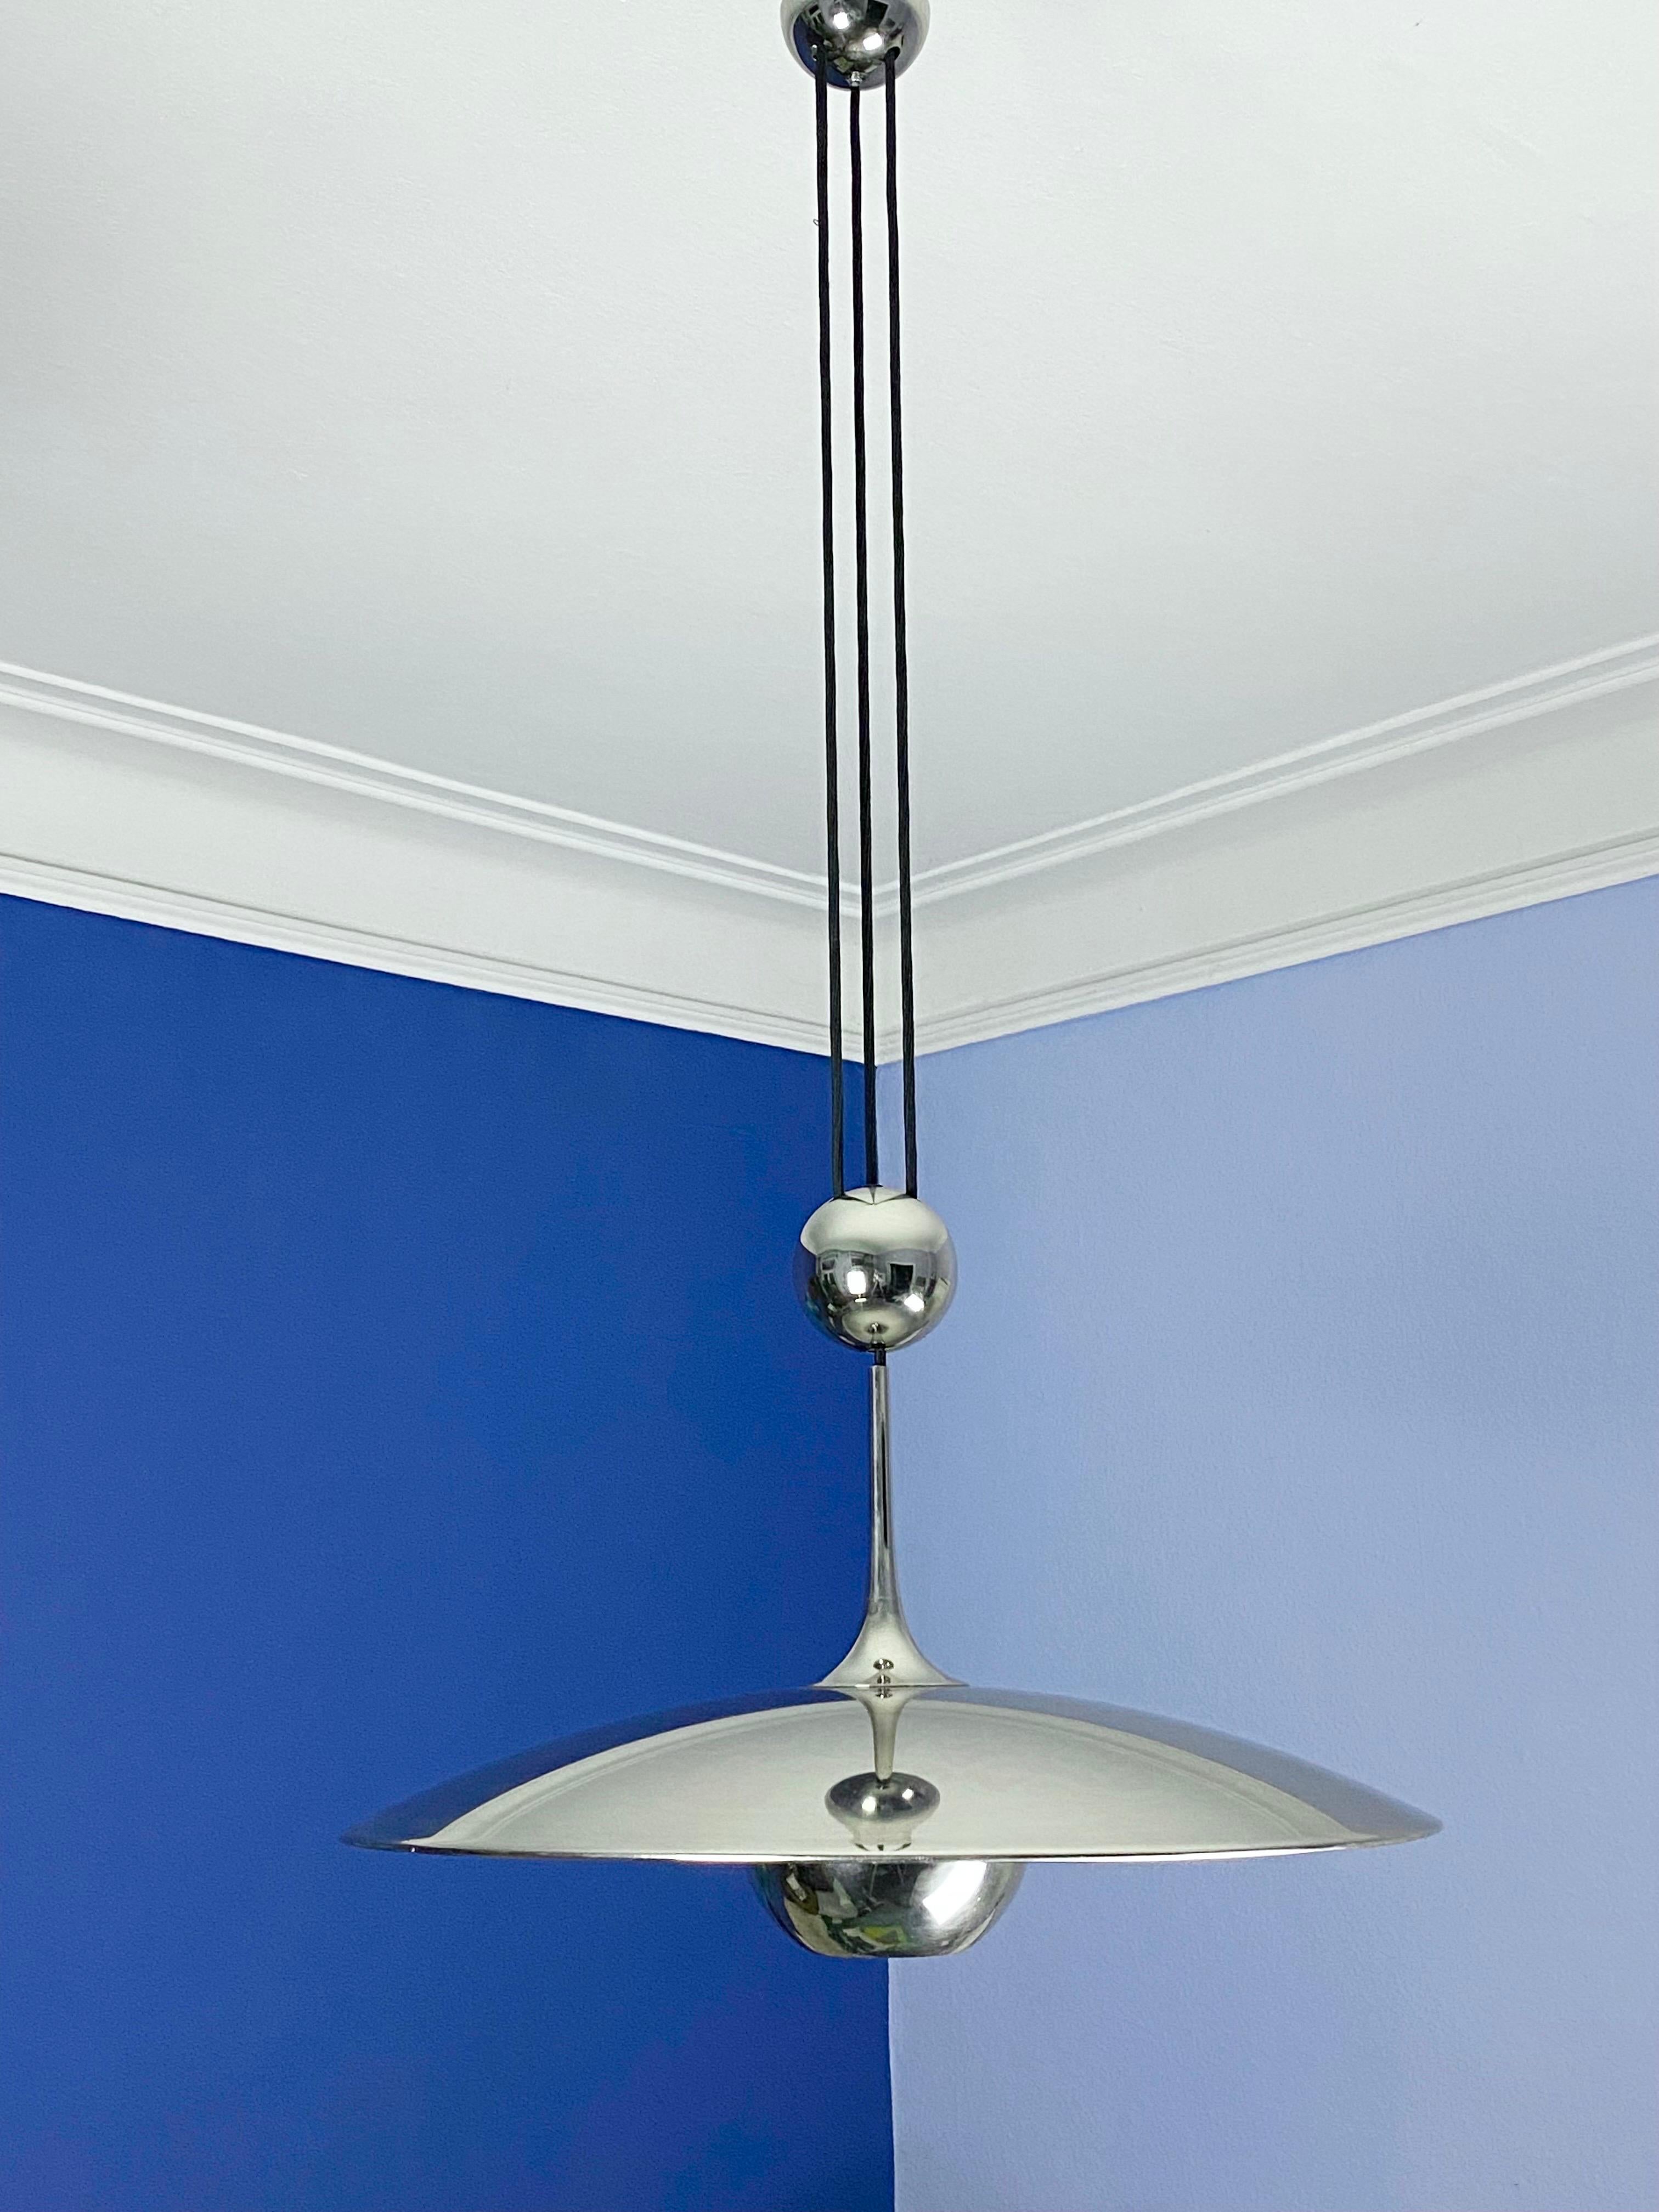 Adjustable  Pendant Onos55 by Florian Schulz with a Central Counterweight 6